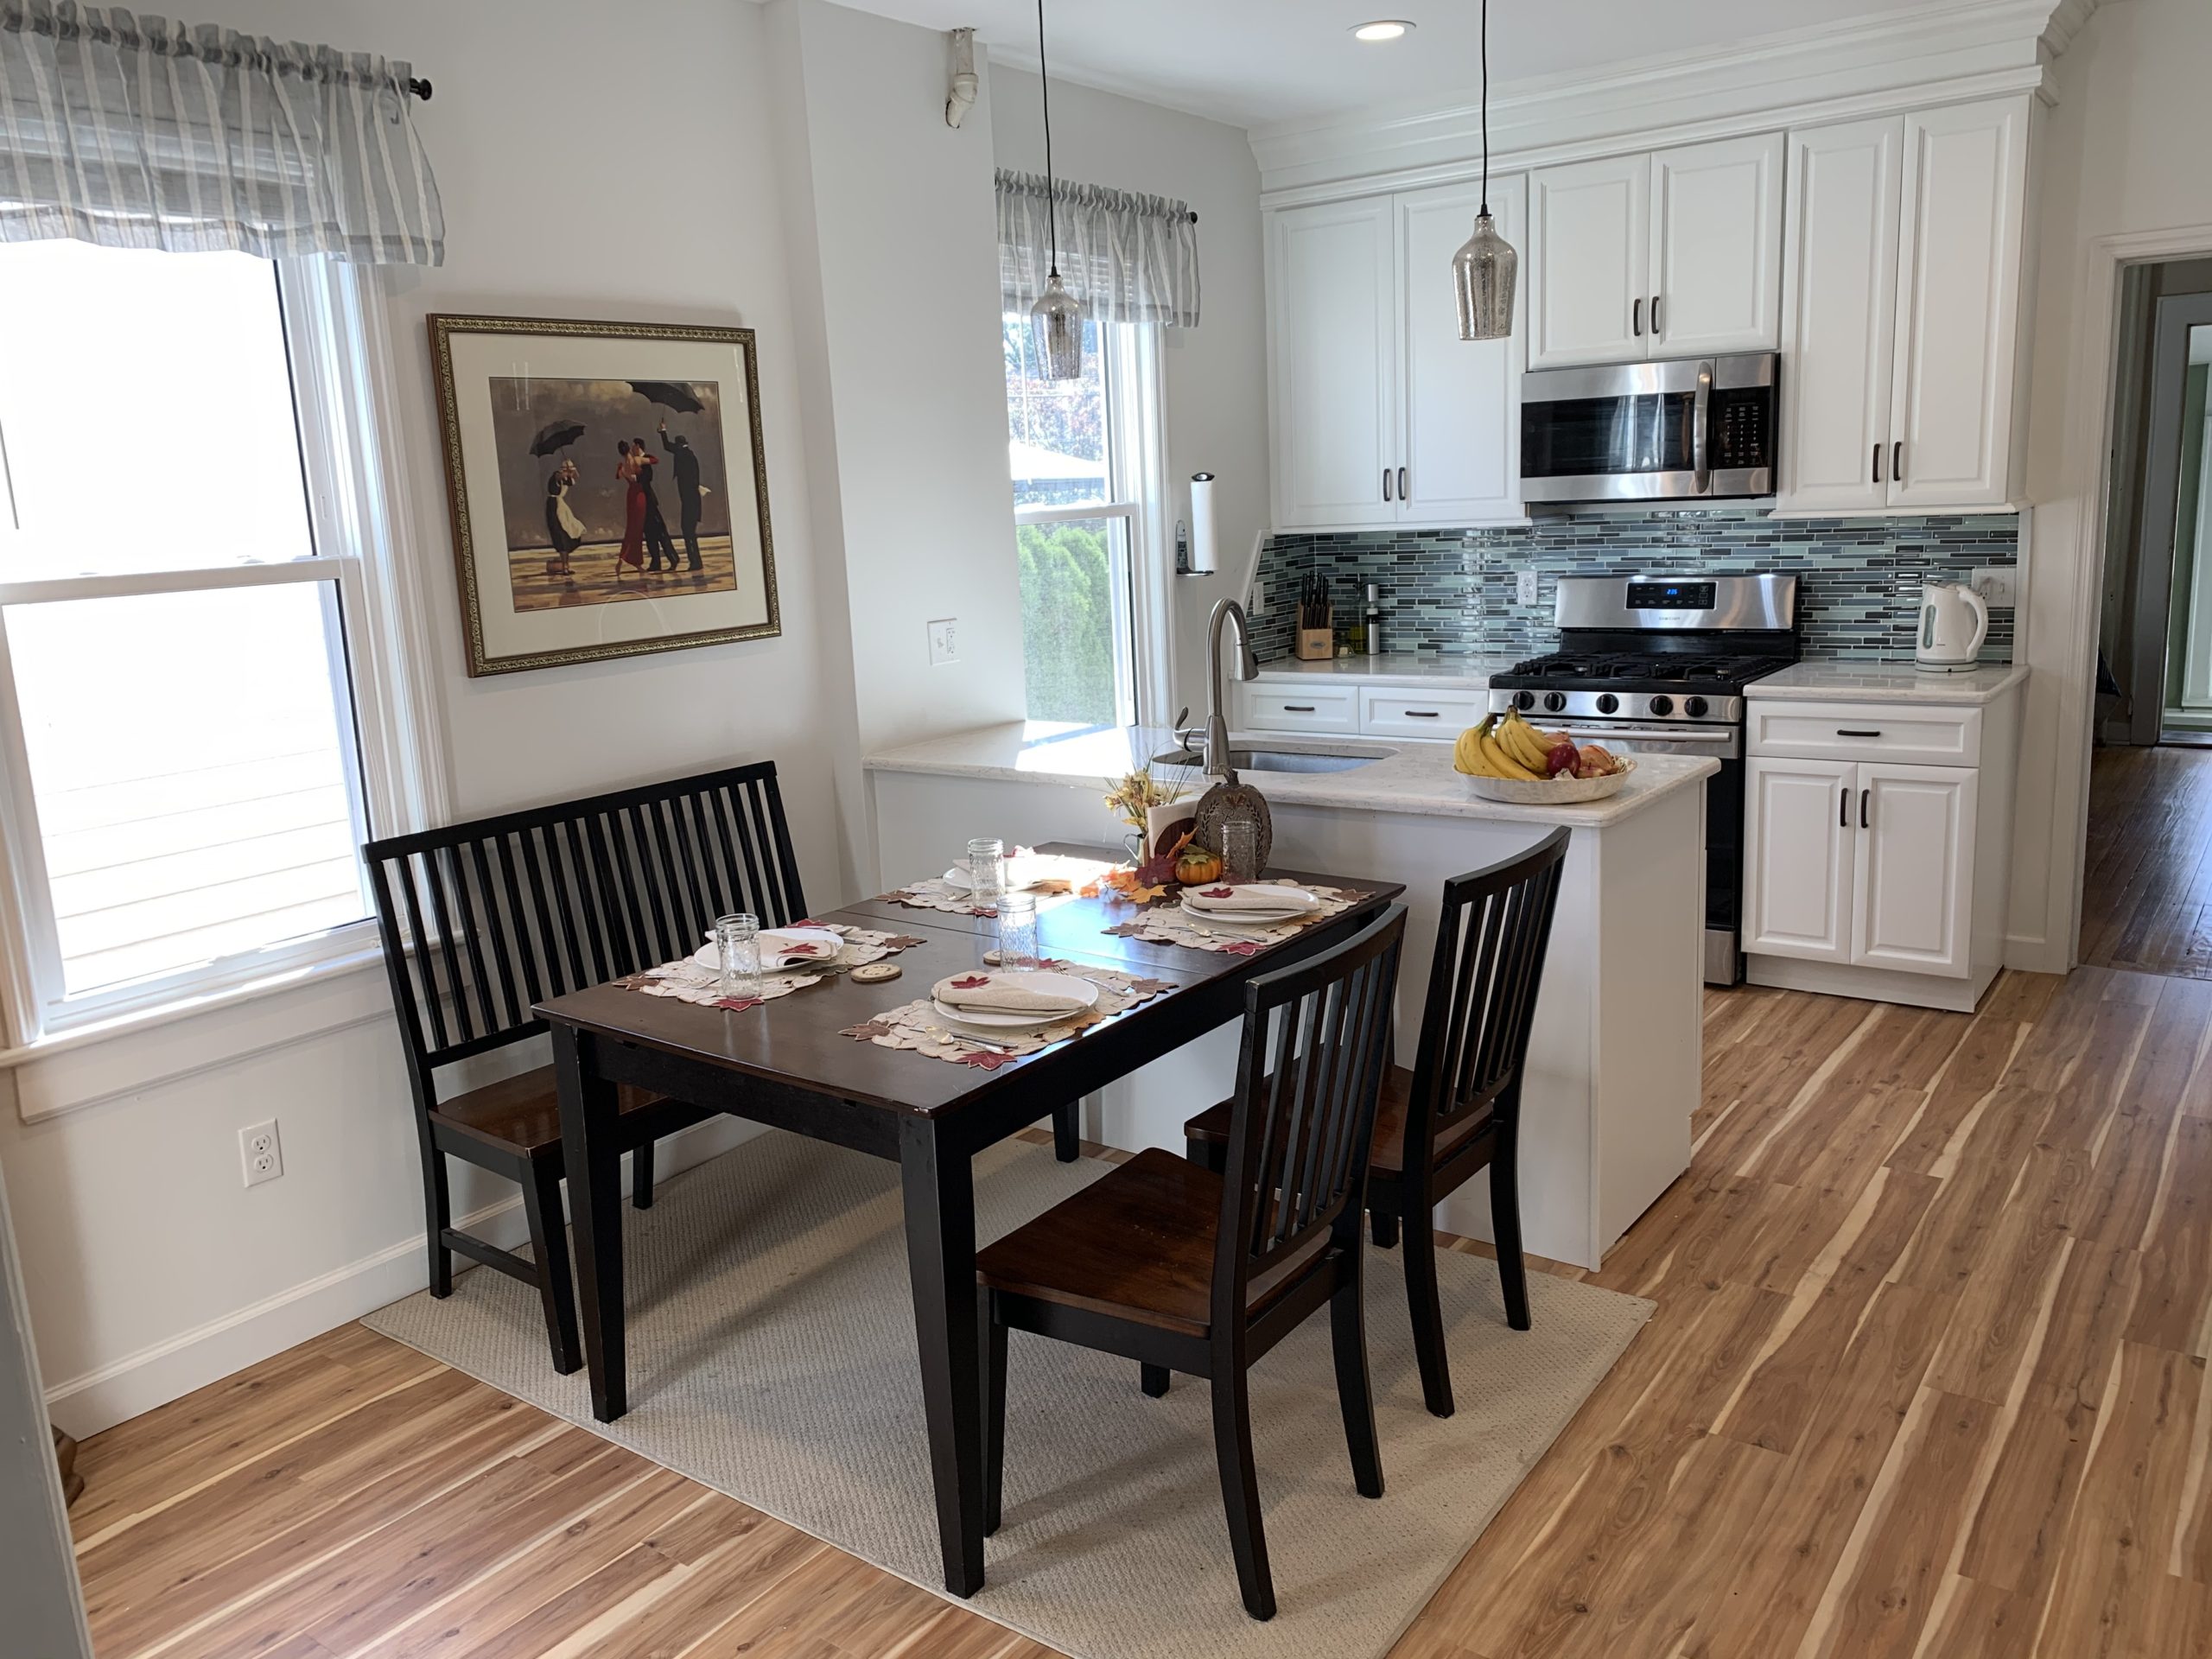 Beautiful Open Concept Galley Kitchen – Our First Floor Renovation, Part 2